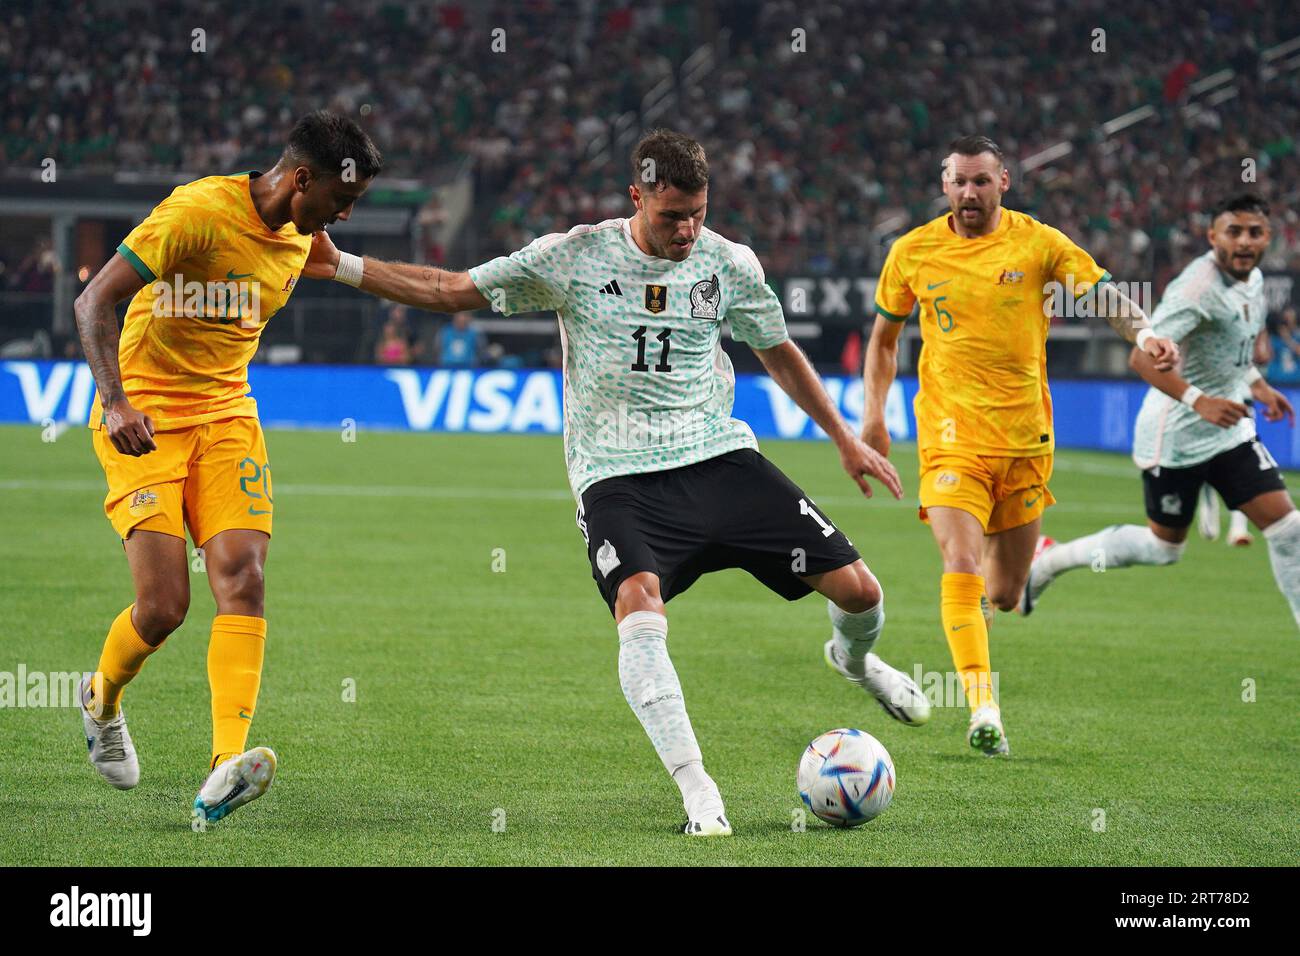 Arlington, Texas, United States: Santiago Gimenez (MX) in action during the international soccer game between Mexico and Australia played at AT&T Stadium on Saturday September 9, 2023.  (Photo by Javier Vicencio / Eyepix Group/Sipa USA) Stock Photo